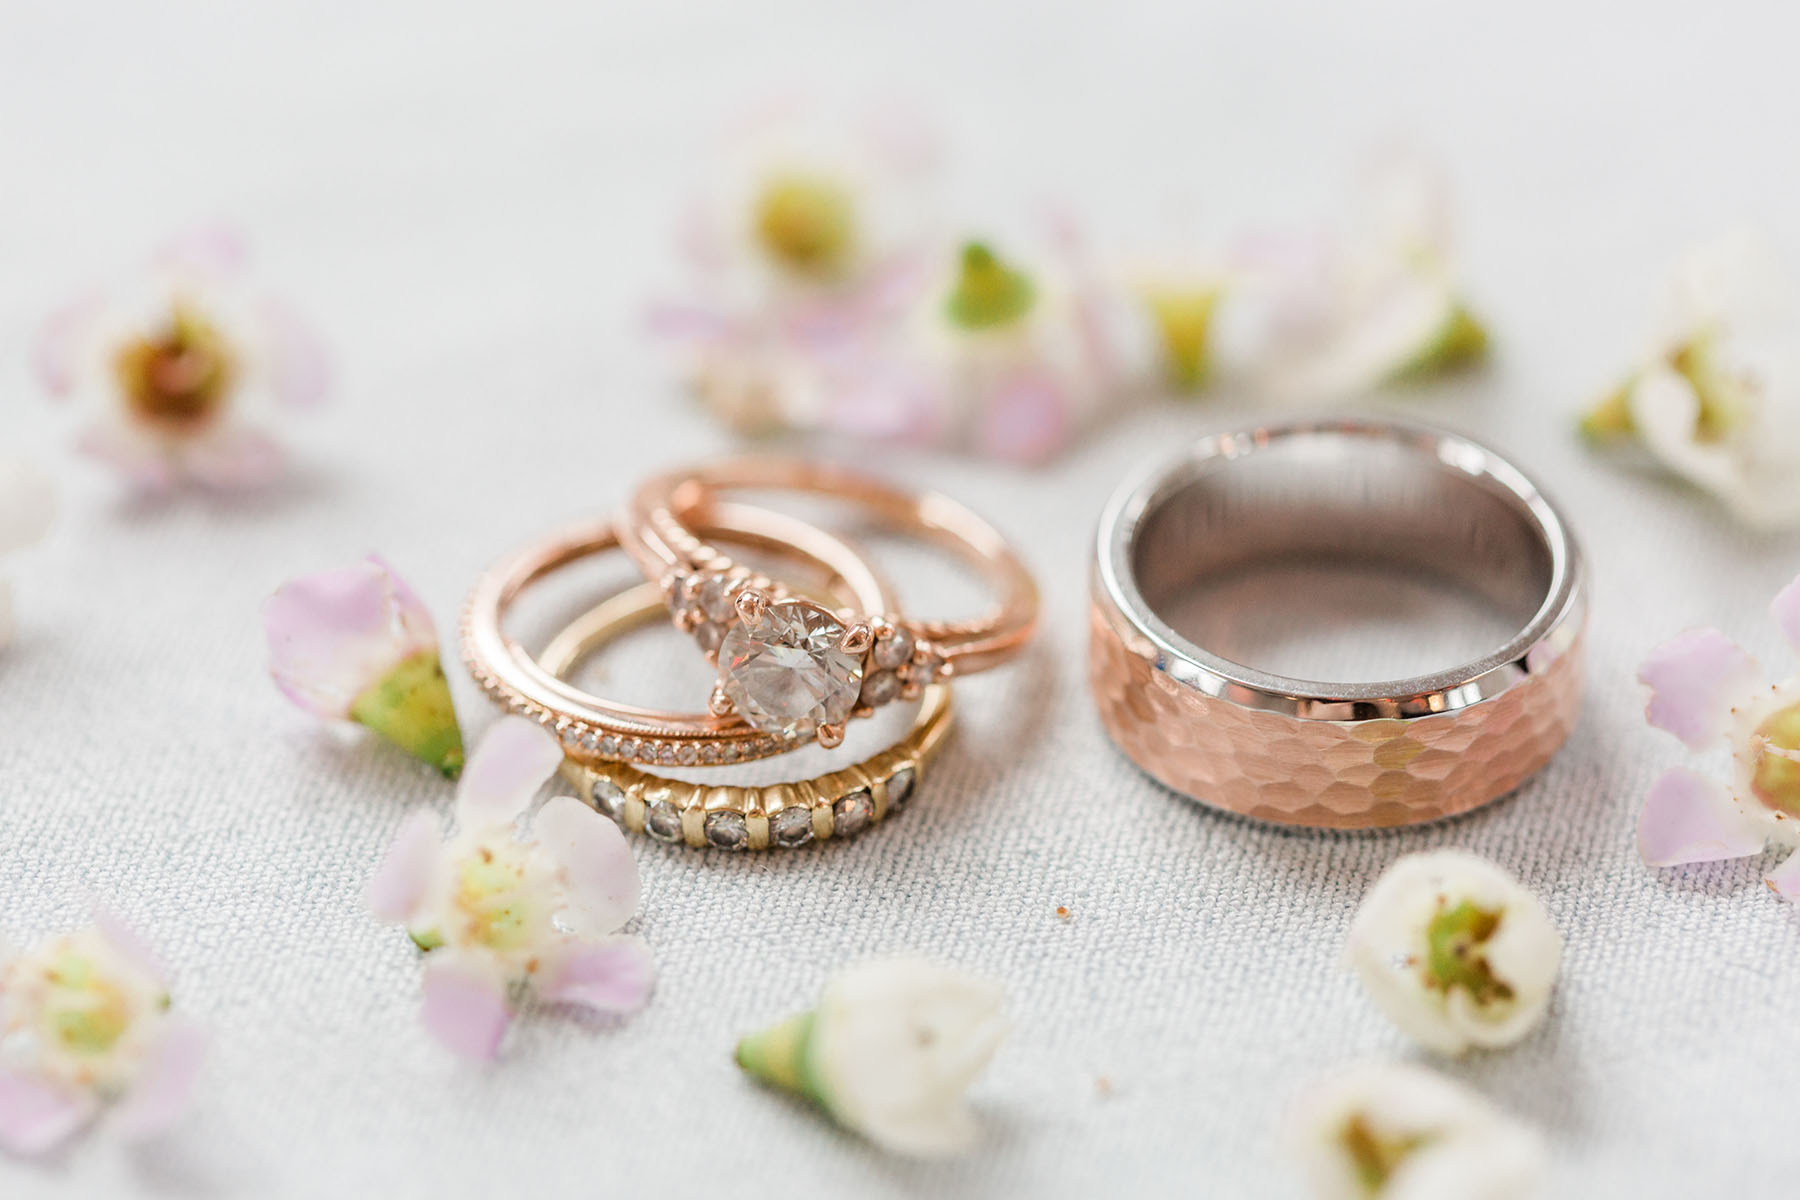 Rose Gold Wedding Rings With Flowers Flat Lay